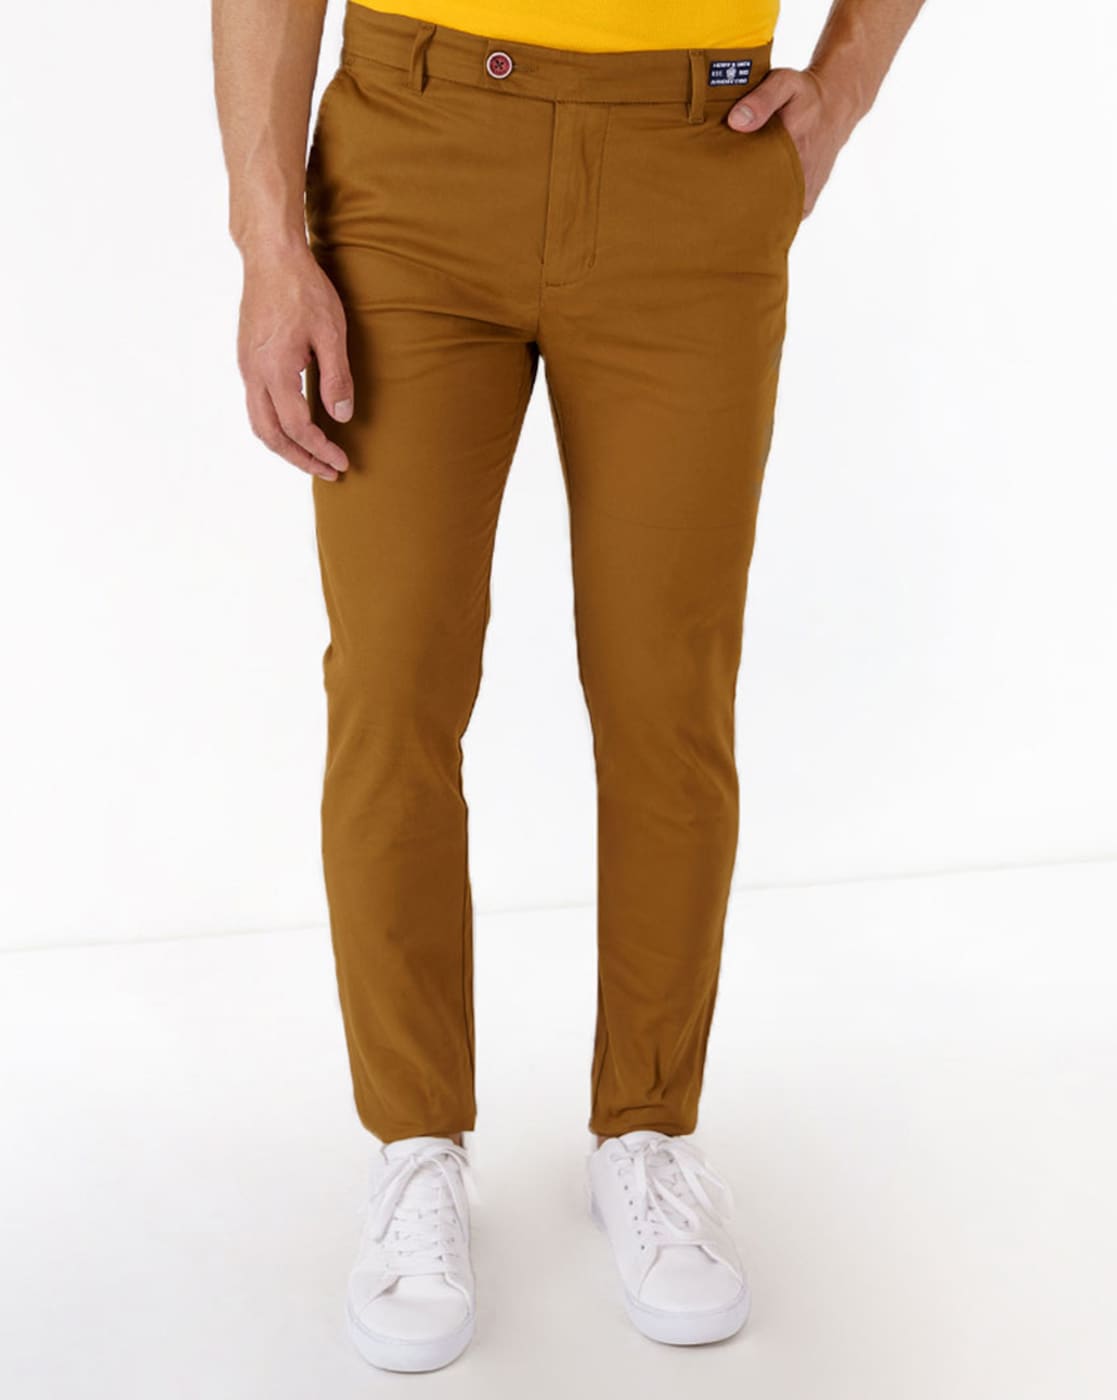 Share 78+ henry and smith trousers - in.cdgdbentre